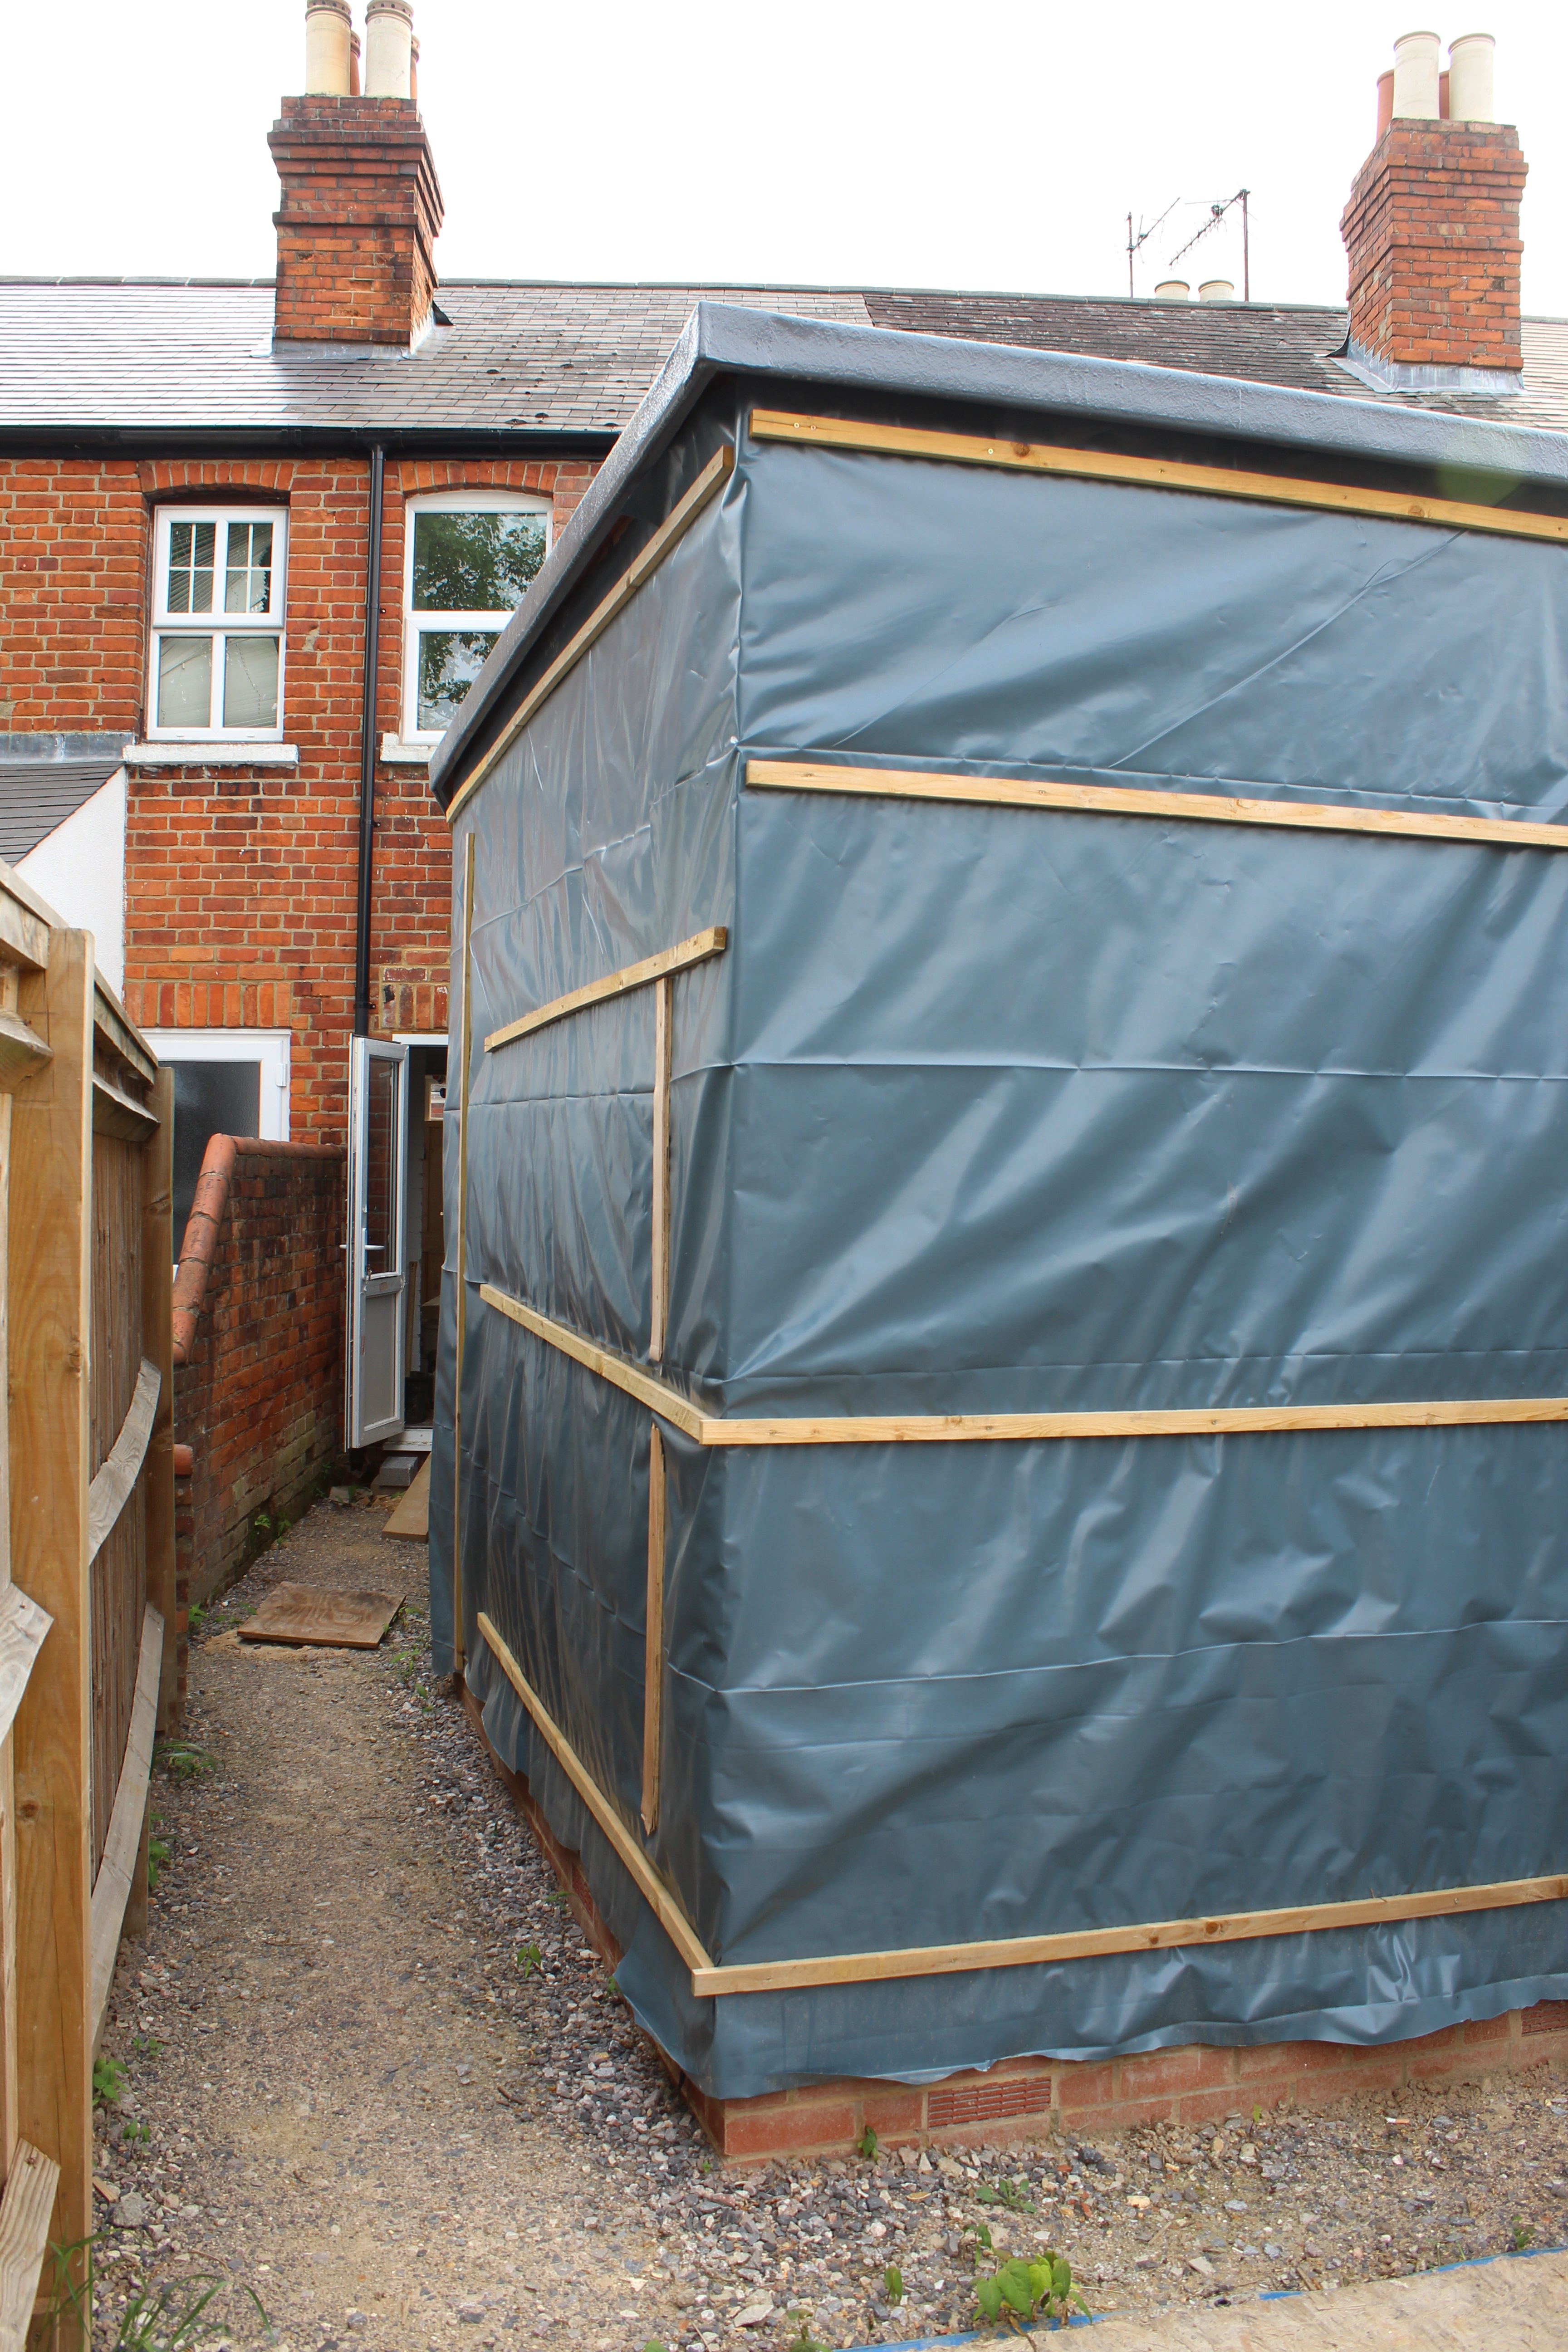 External view of extension wrapped and secured